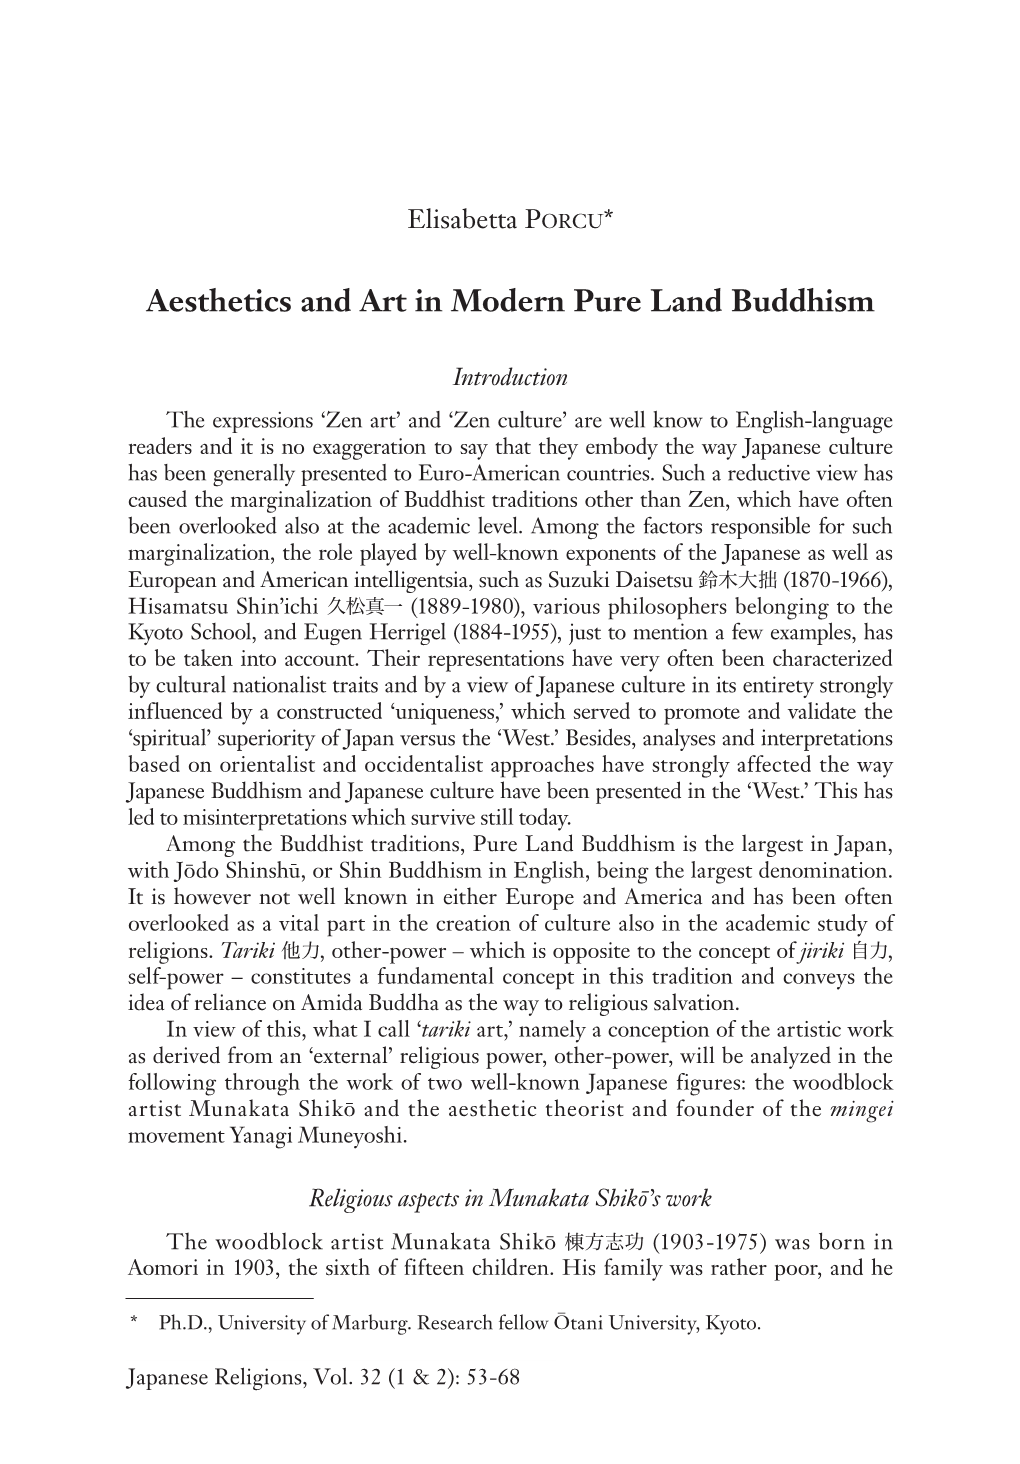 Aesthetics and Art in Modern Pure Land Buddhism